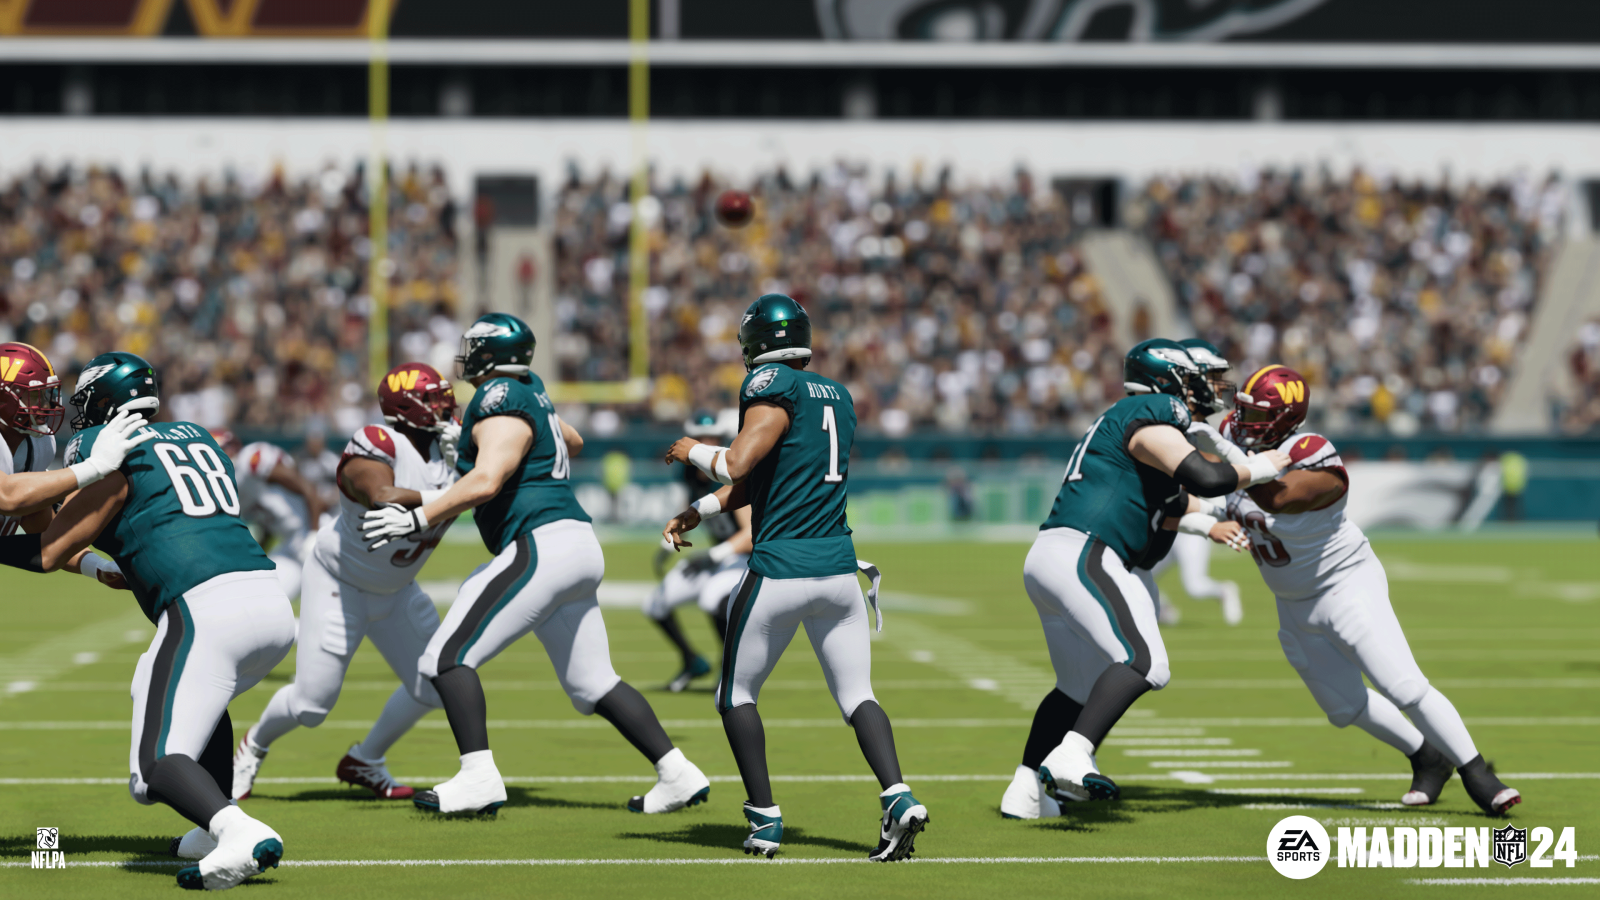 Madden NFL 23 release date, trailer, pre-order, cover and news